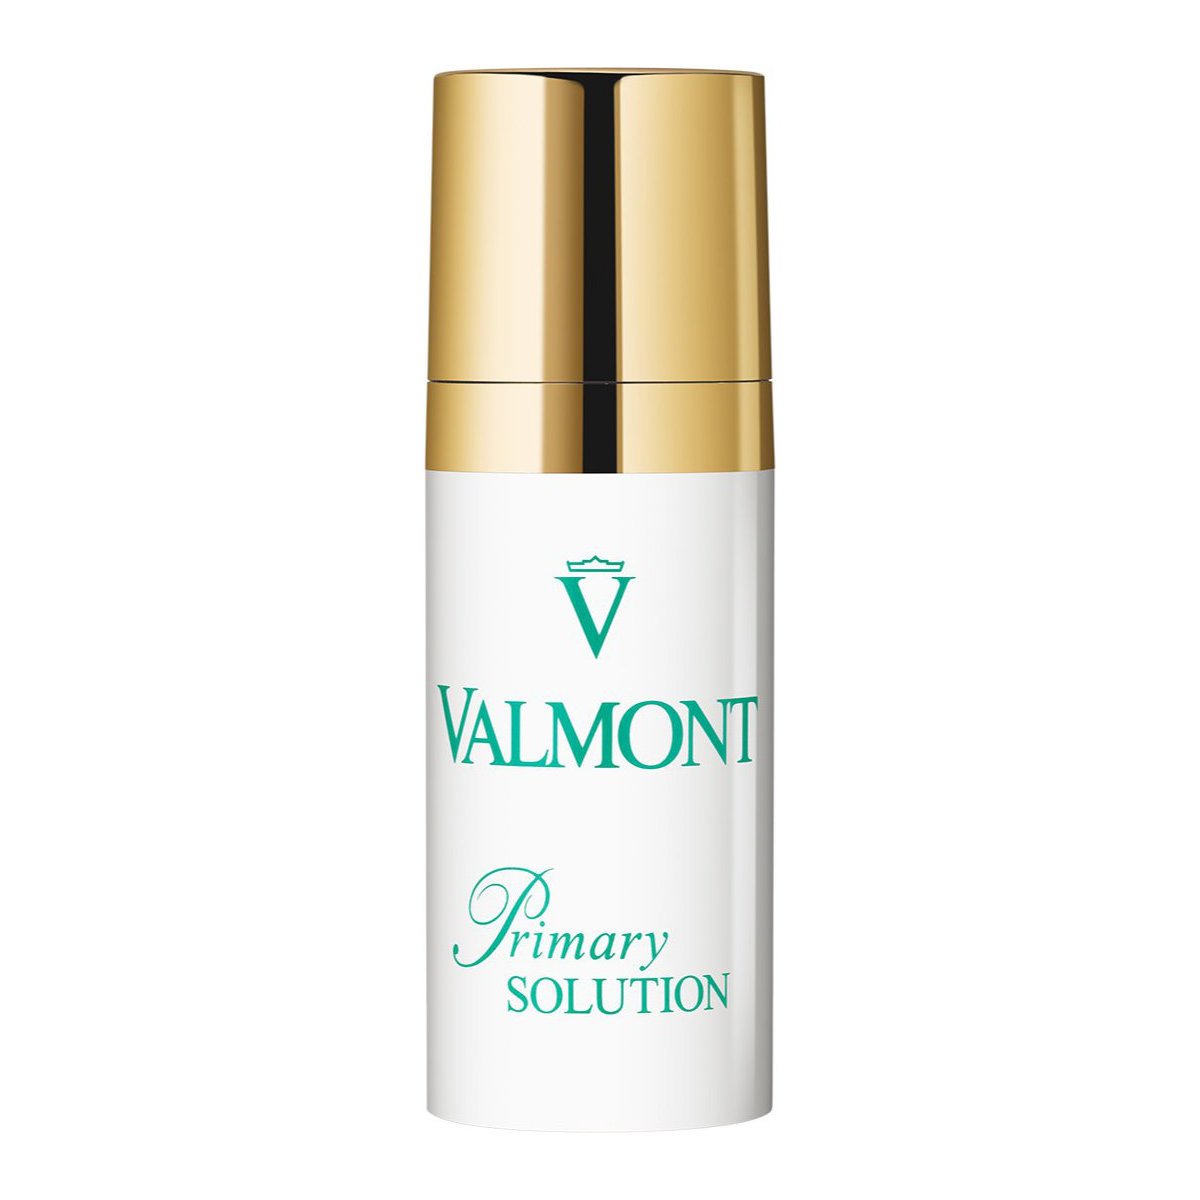 Primary Solution Valmont